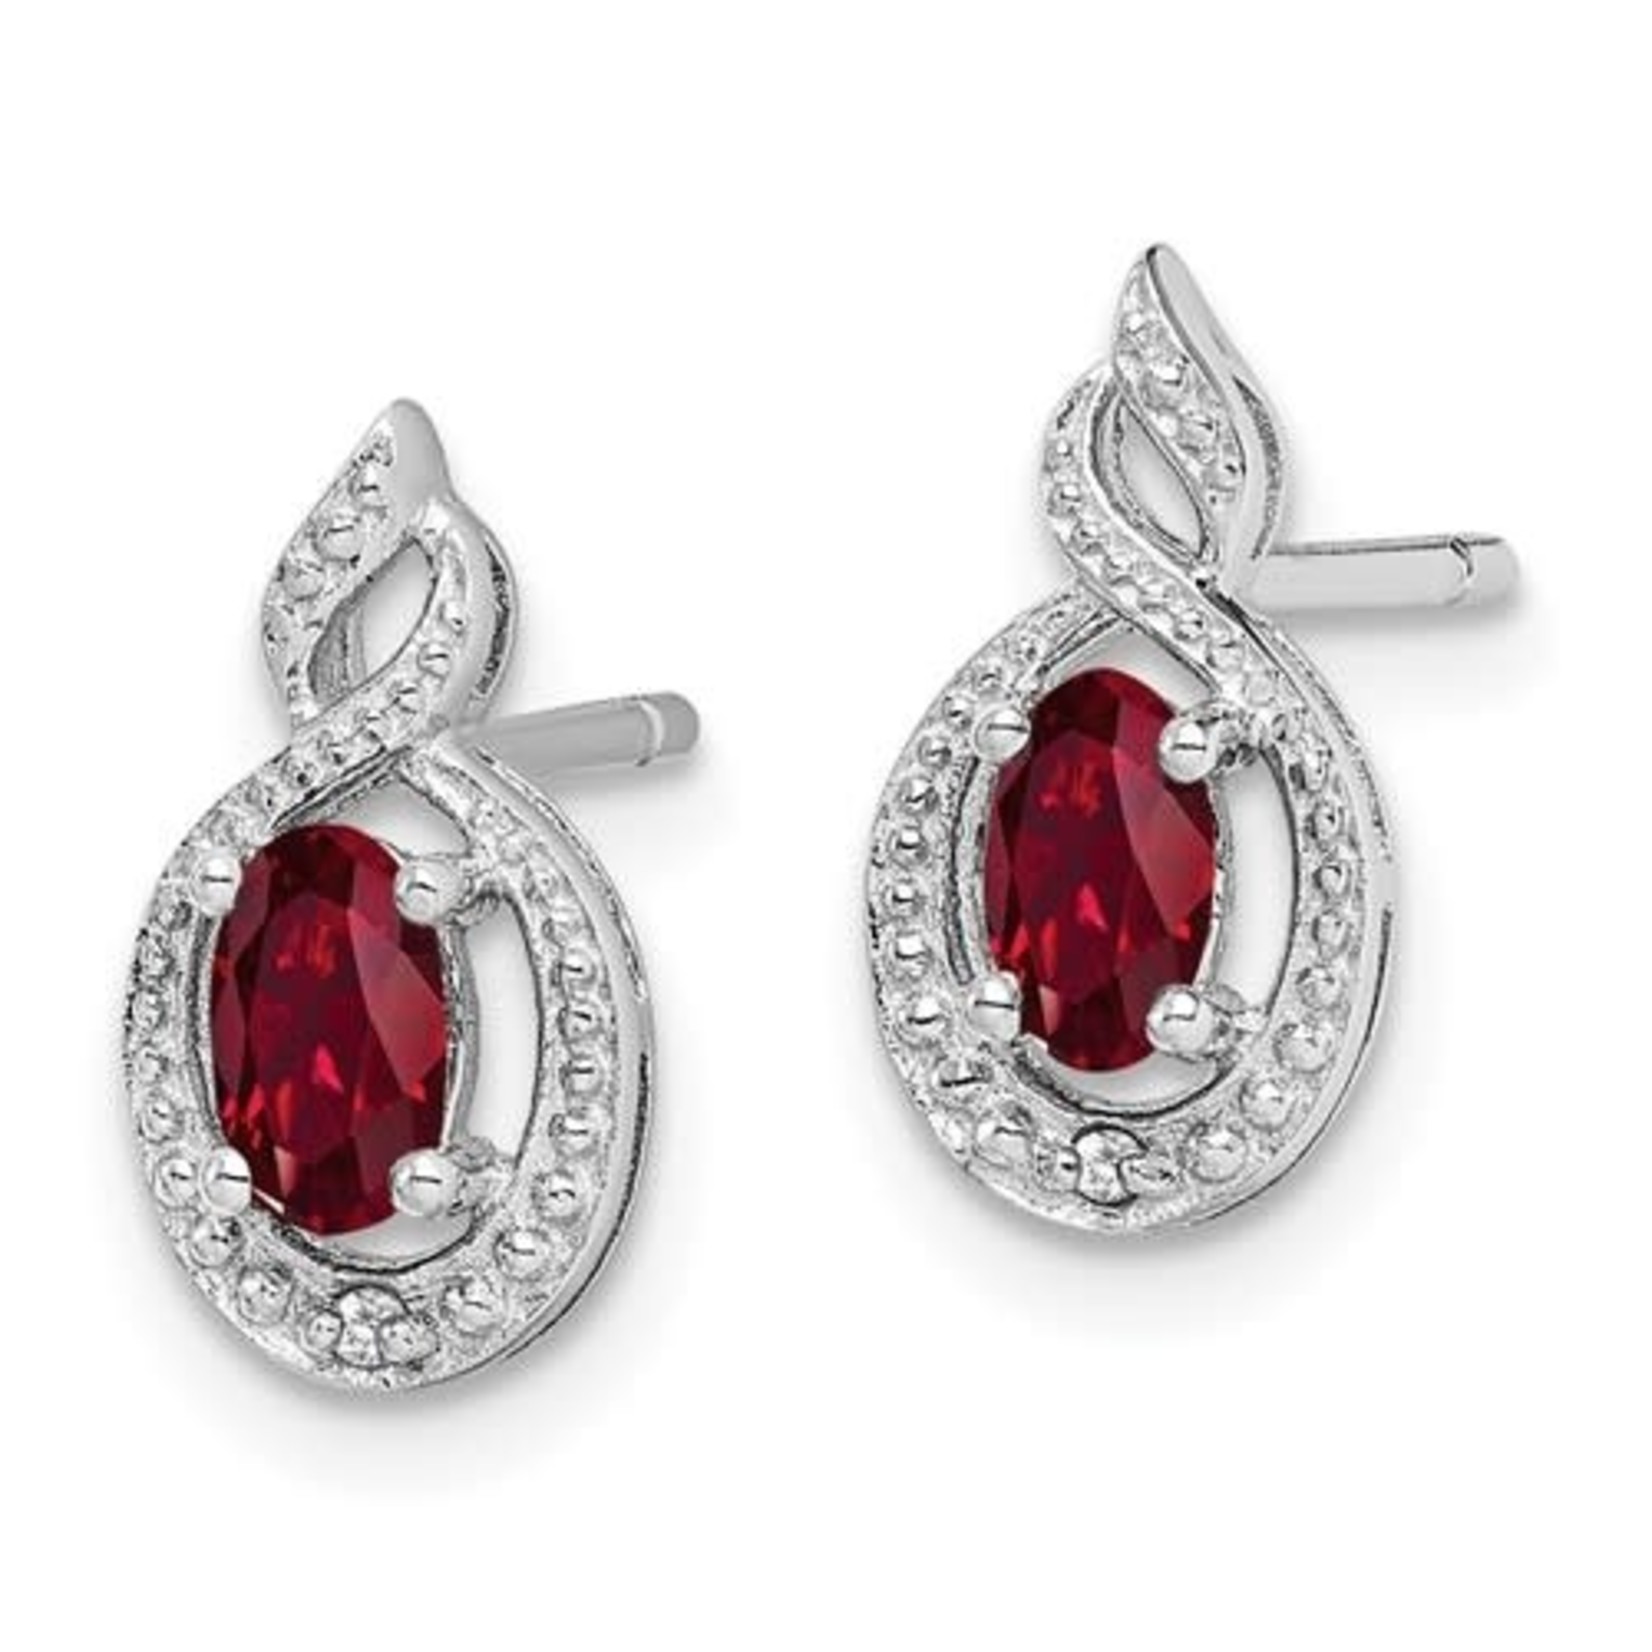 QUALITY GOLD OF CINCINNATI INC Sterling Silver Rhodium Plated Created Ruby and Diamond Earrings